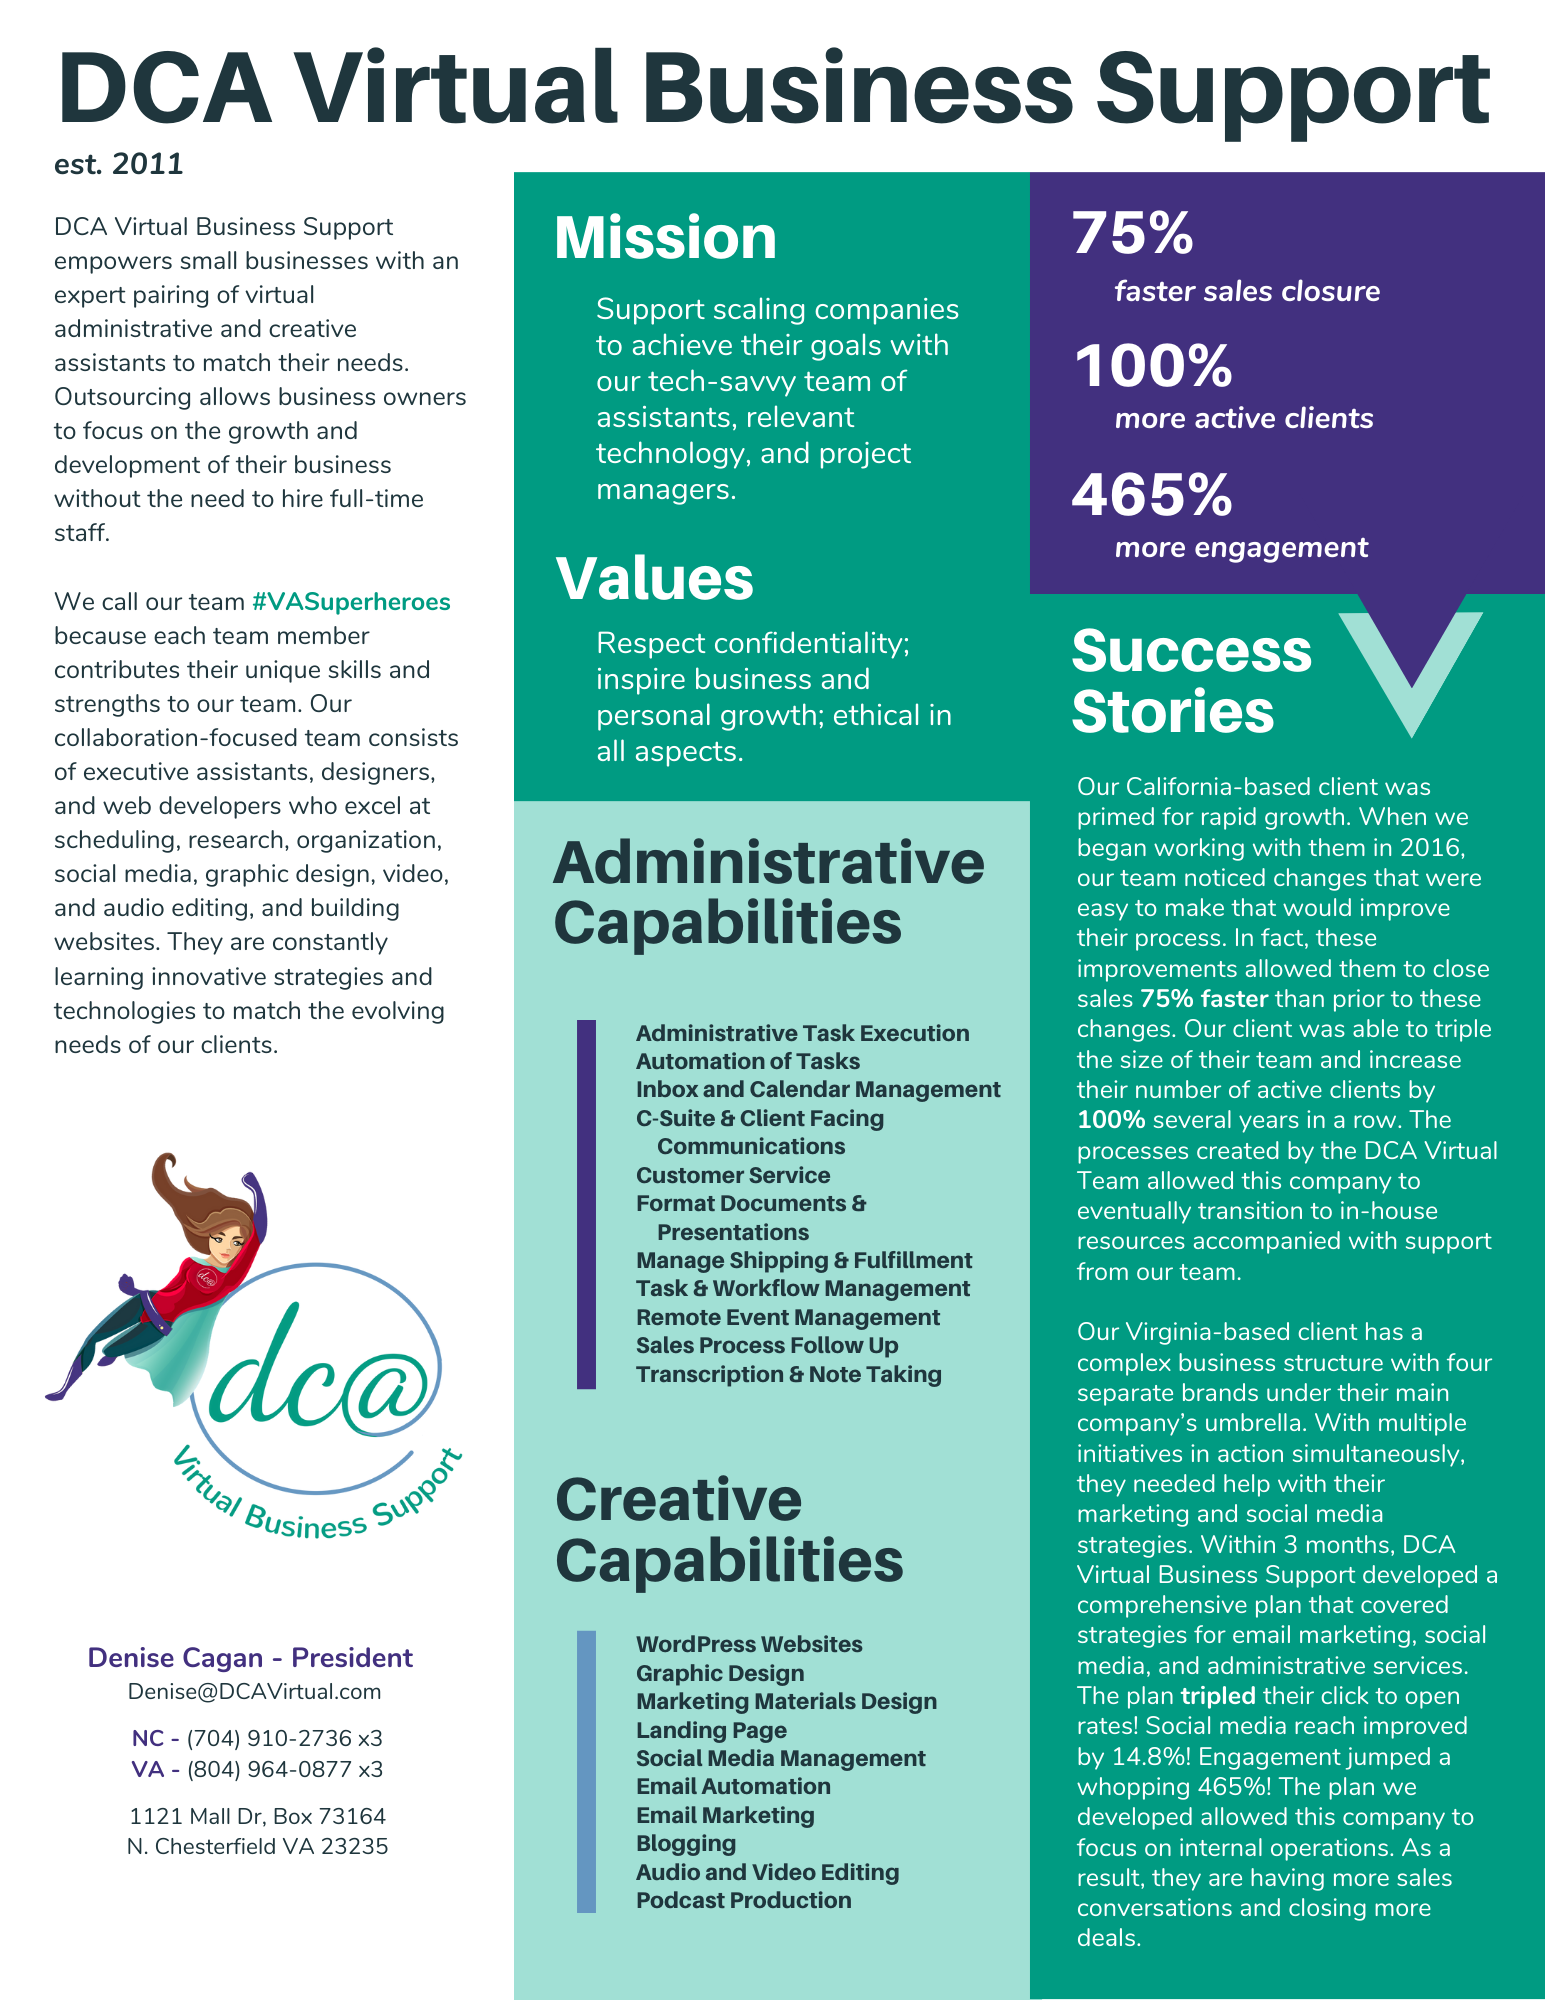 Capability Statement for DCA Virtual